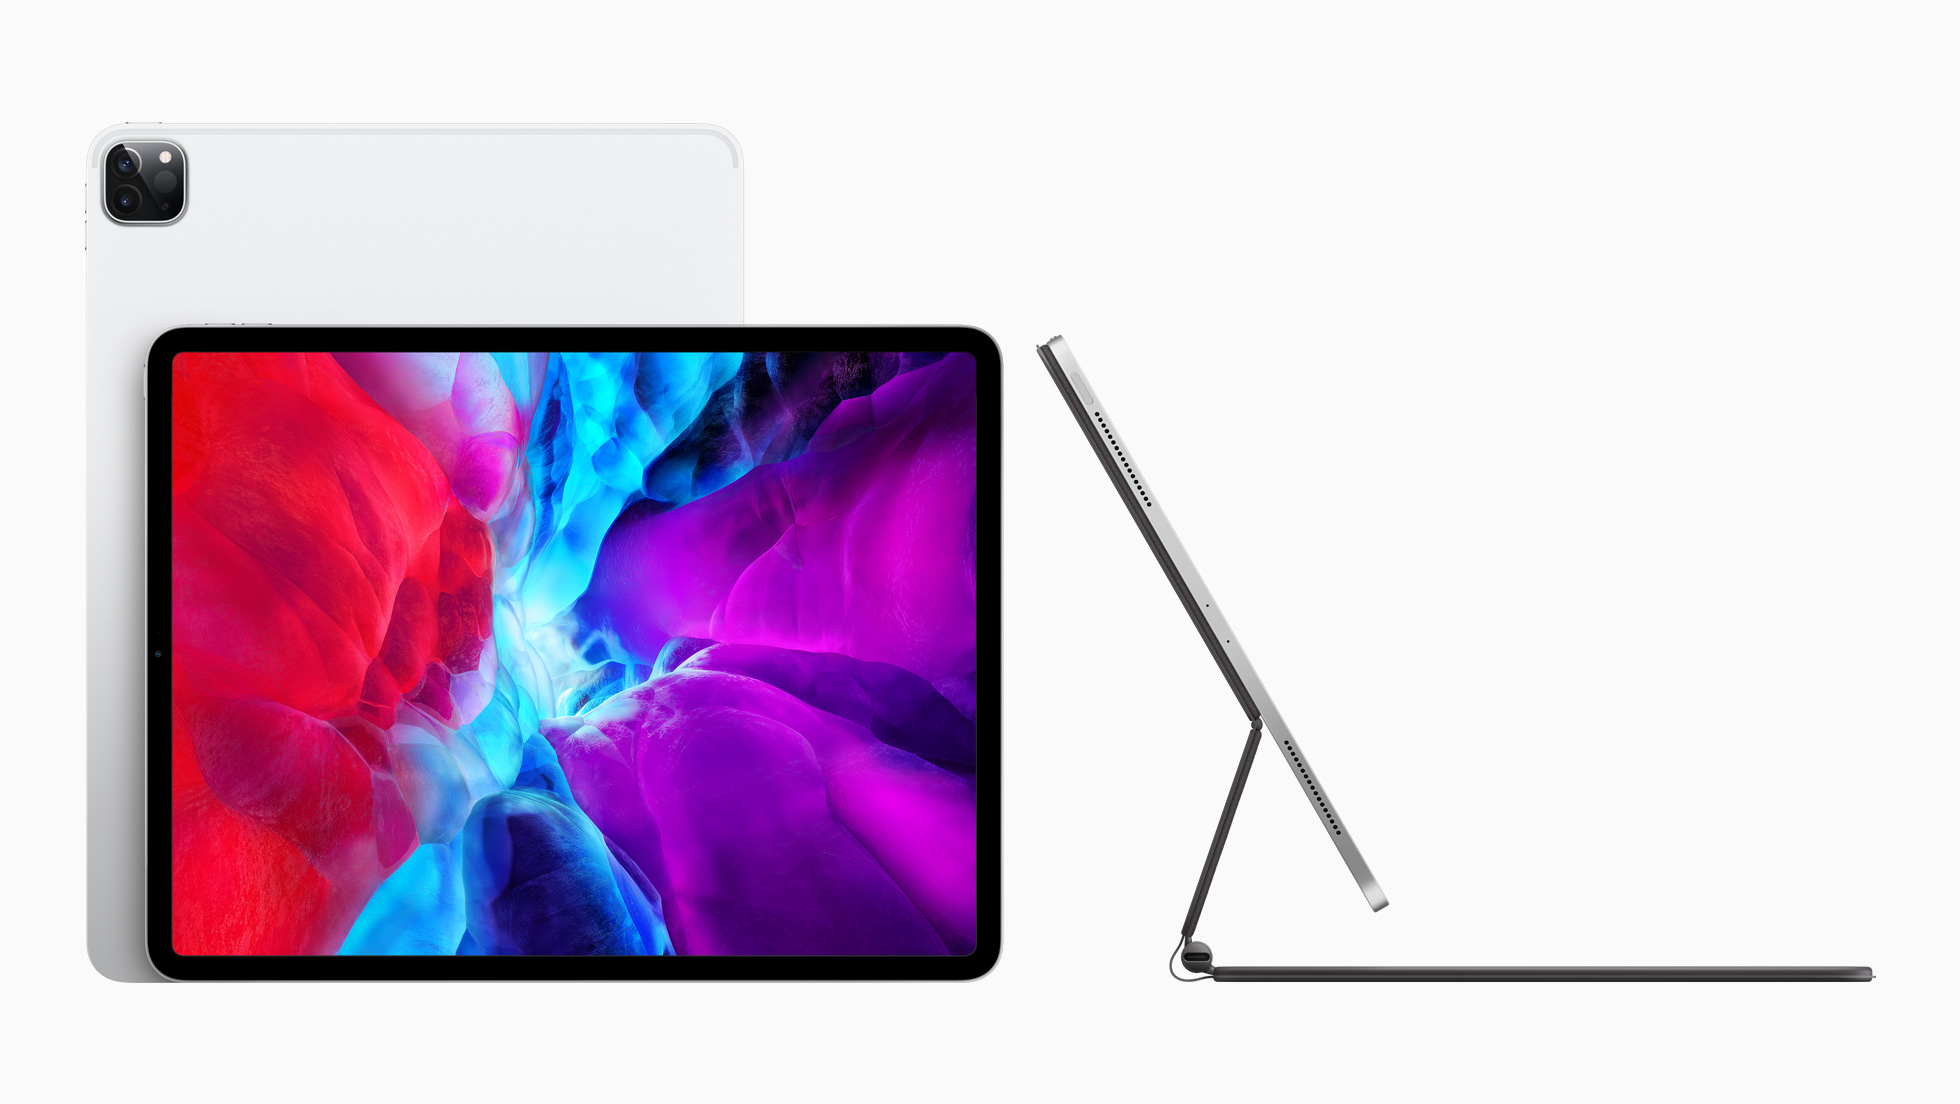 A more powerful, 5G-capable iPad Pro could launch in 2020